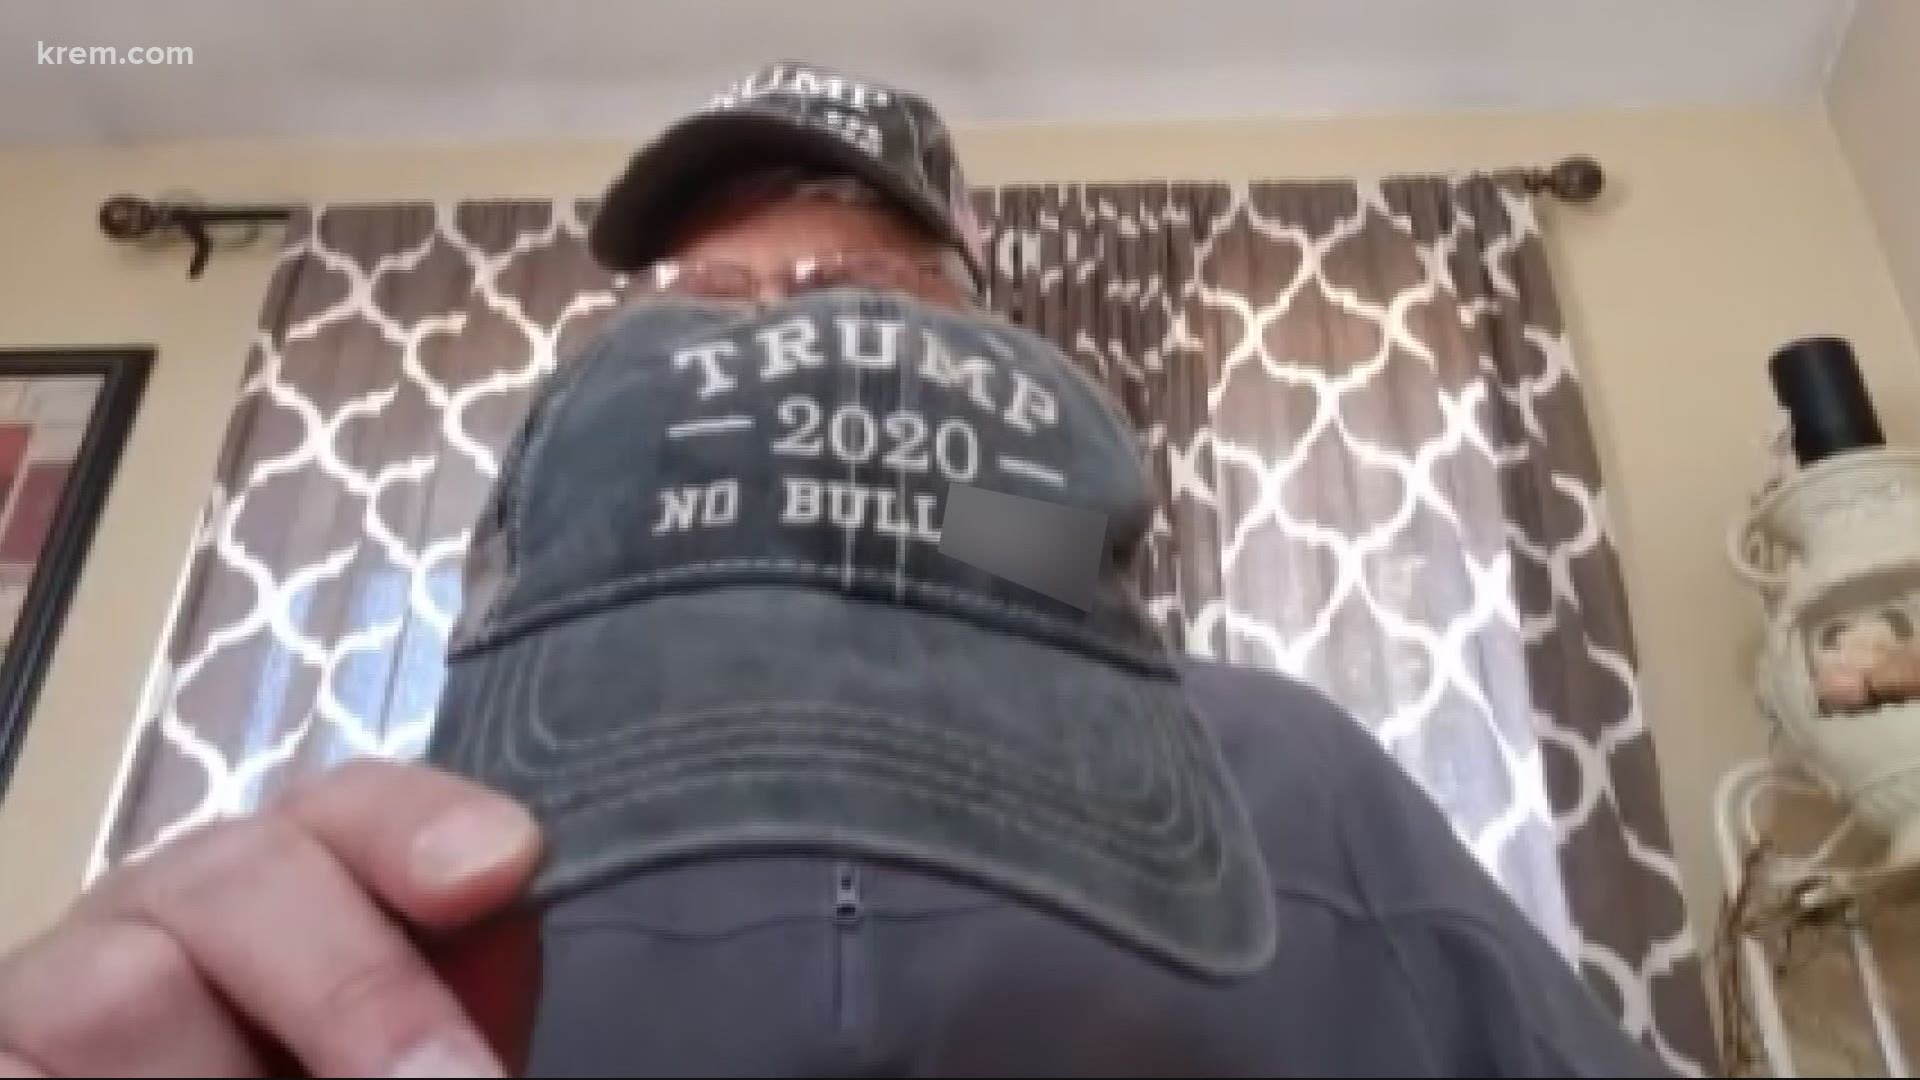 A North Idaho man says he was told to take off a hat showing support for President Trump before he was allowed to vote Wednesday.